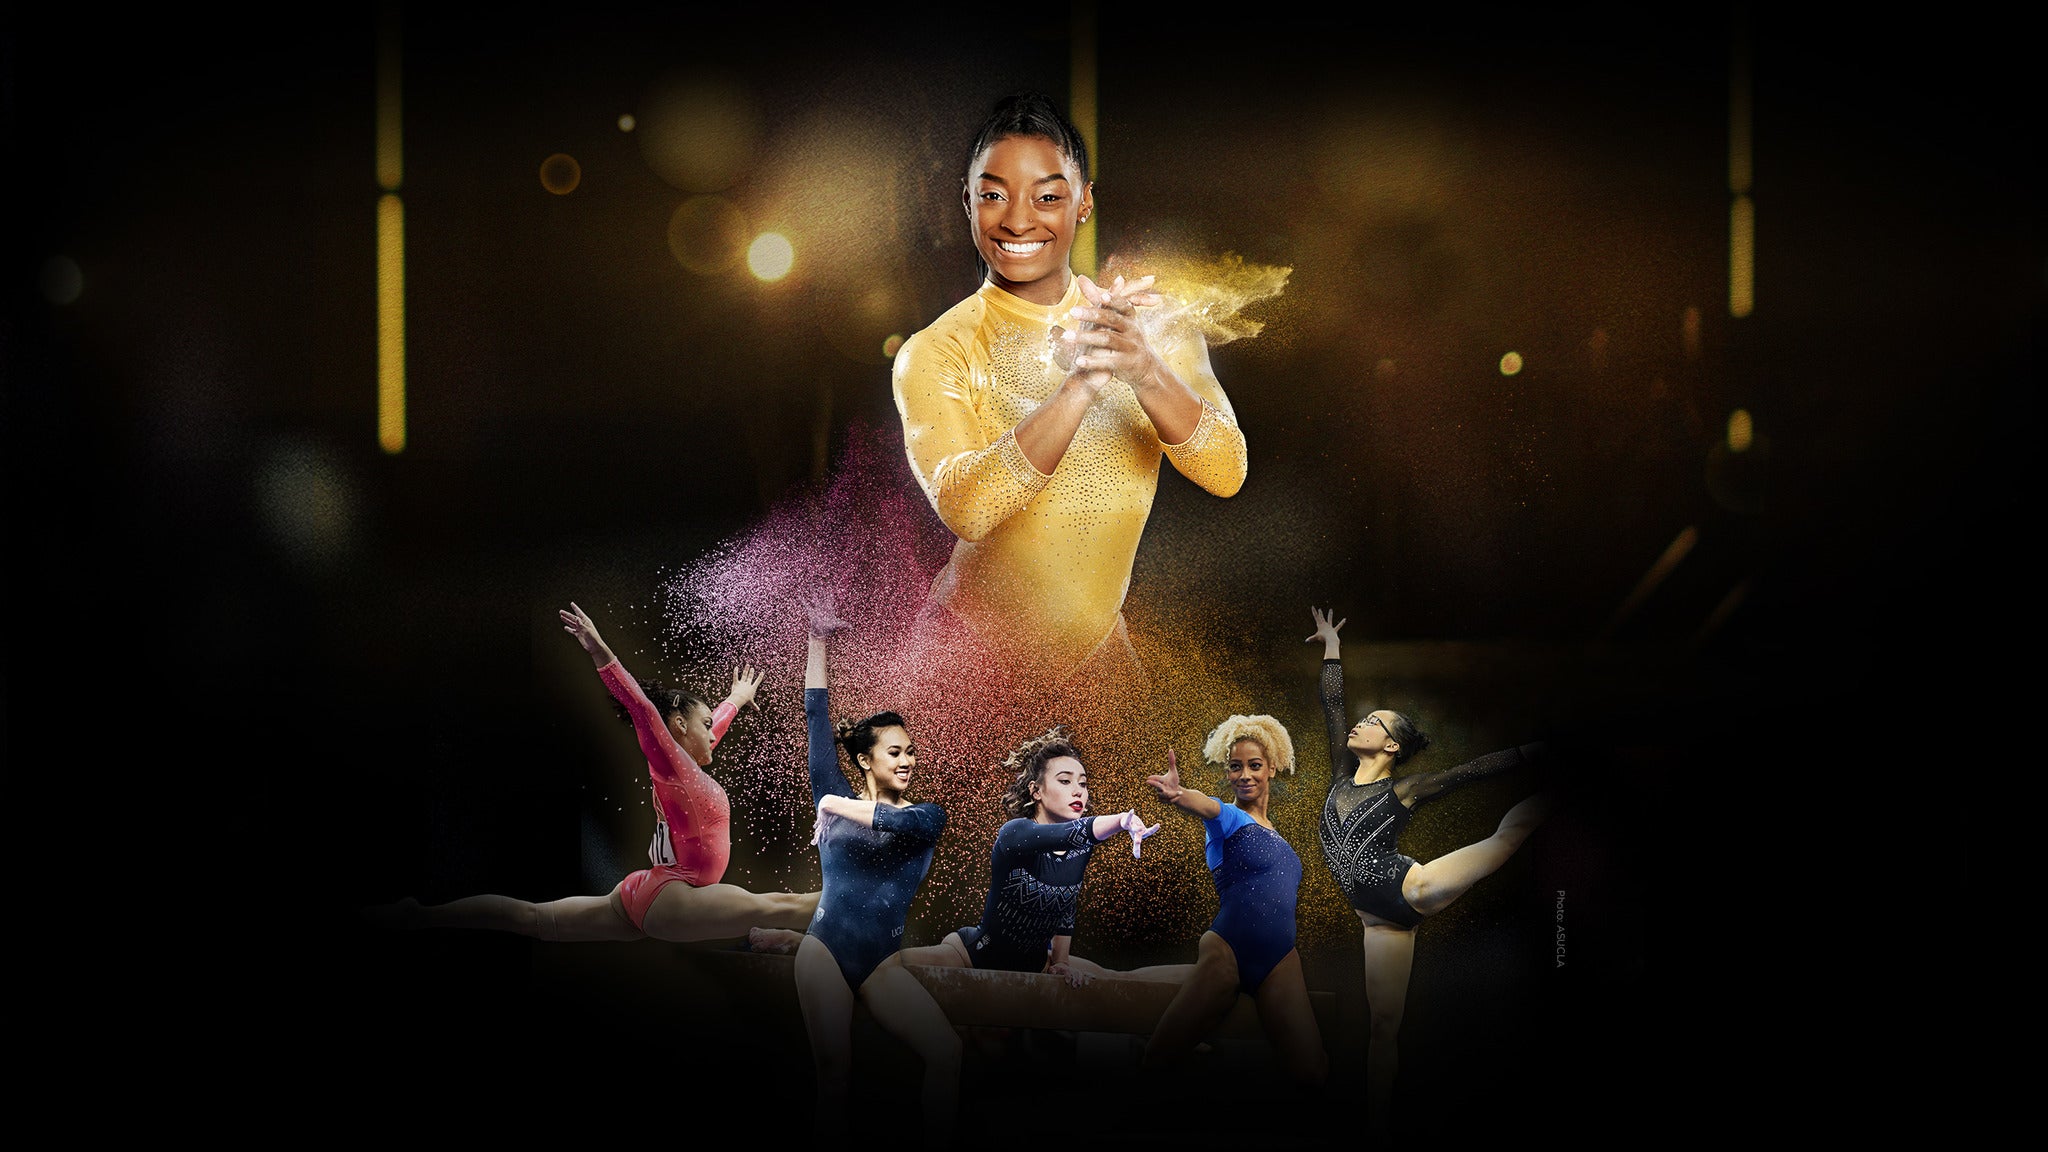 G.O.A.T. Gold Over America Tour Starring Simone Biles in North Little Rock promo photo for Athleta presale offer code